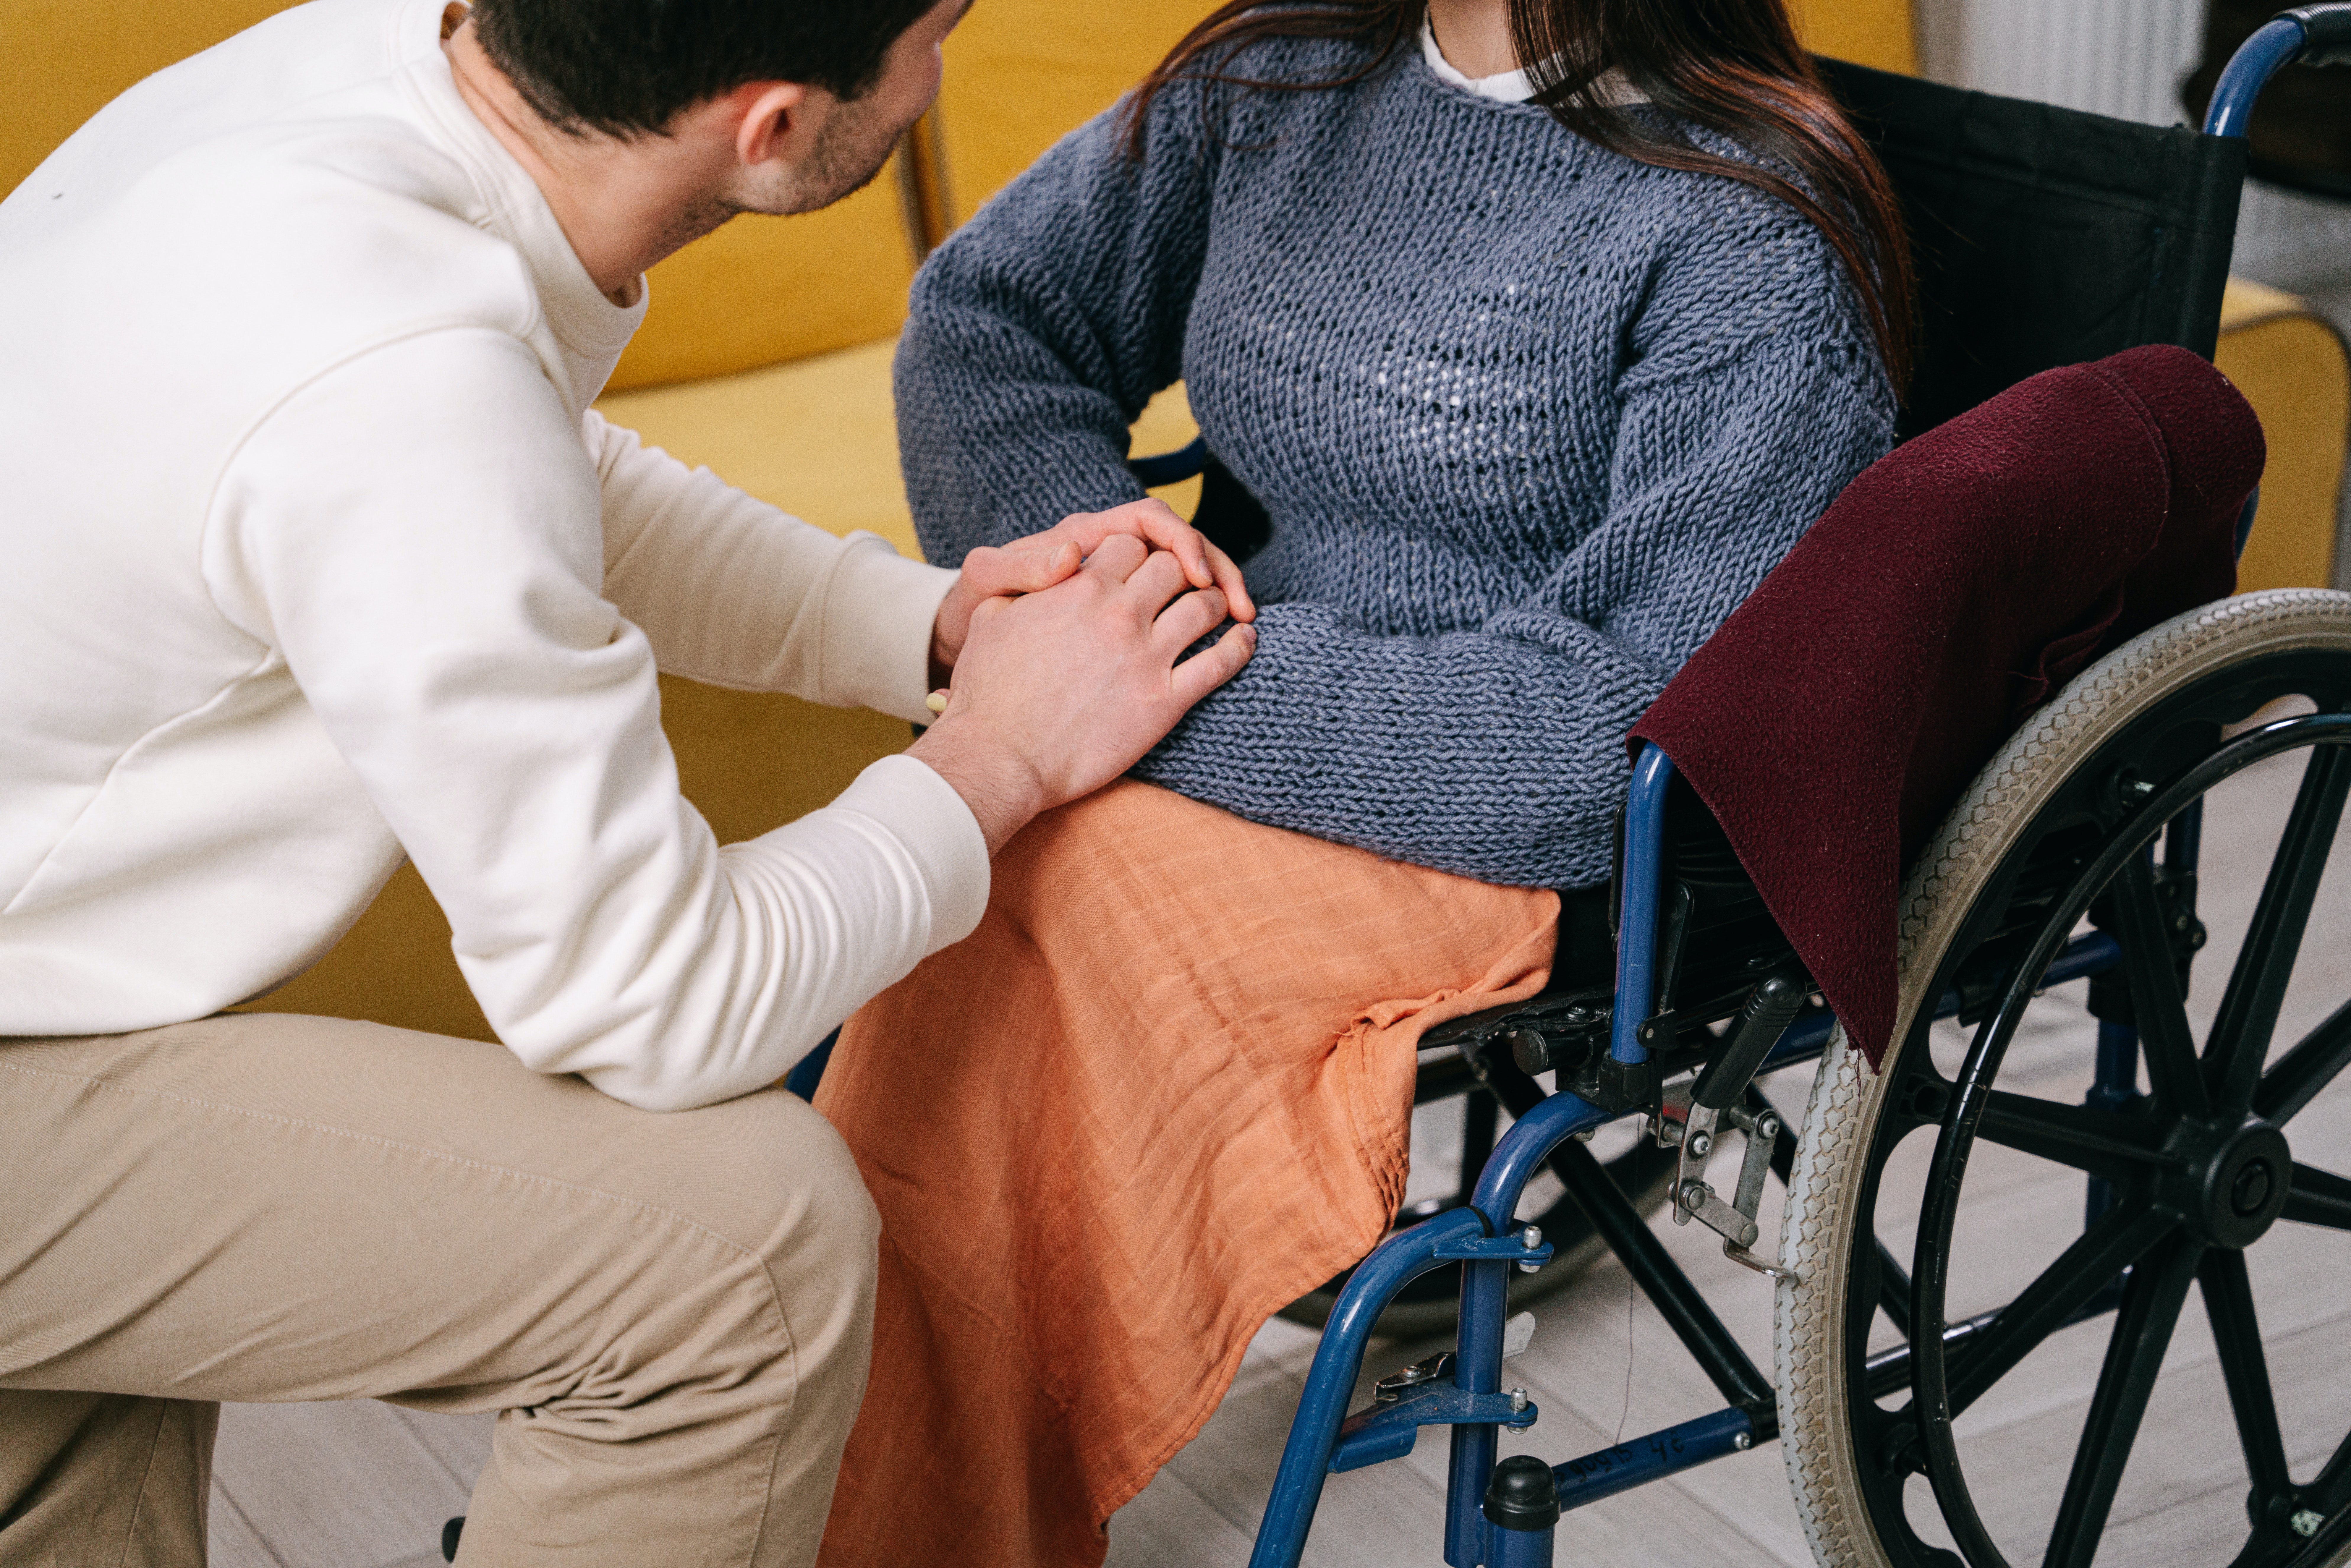 Young woman in wheelchair, young man holds hands next to her